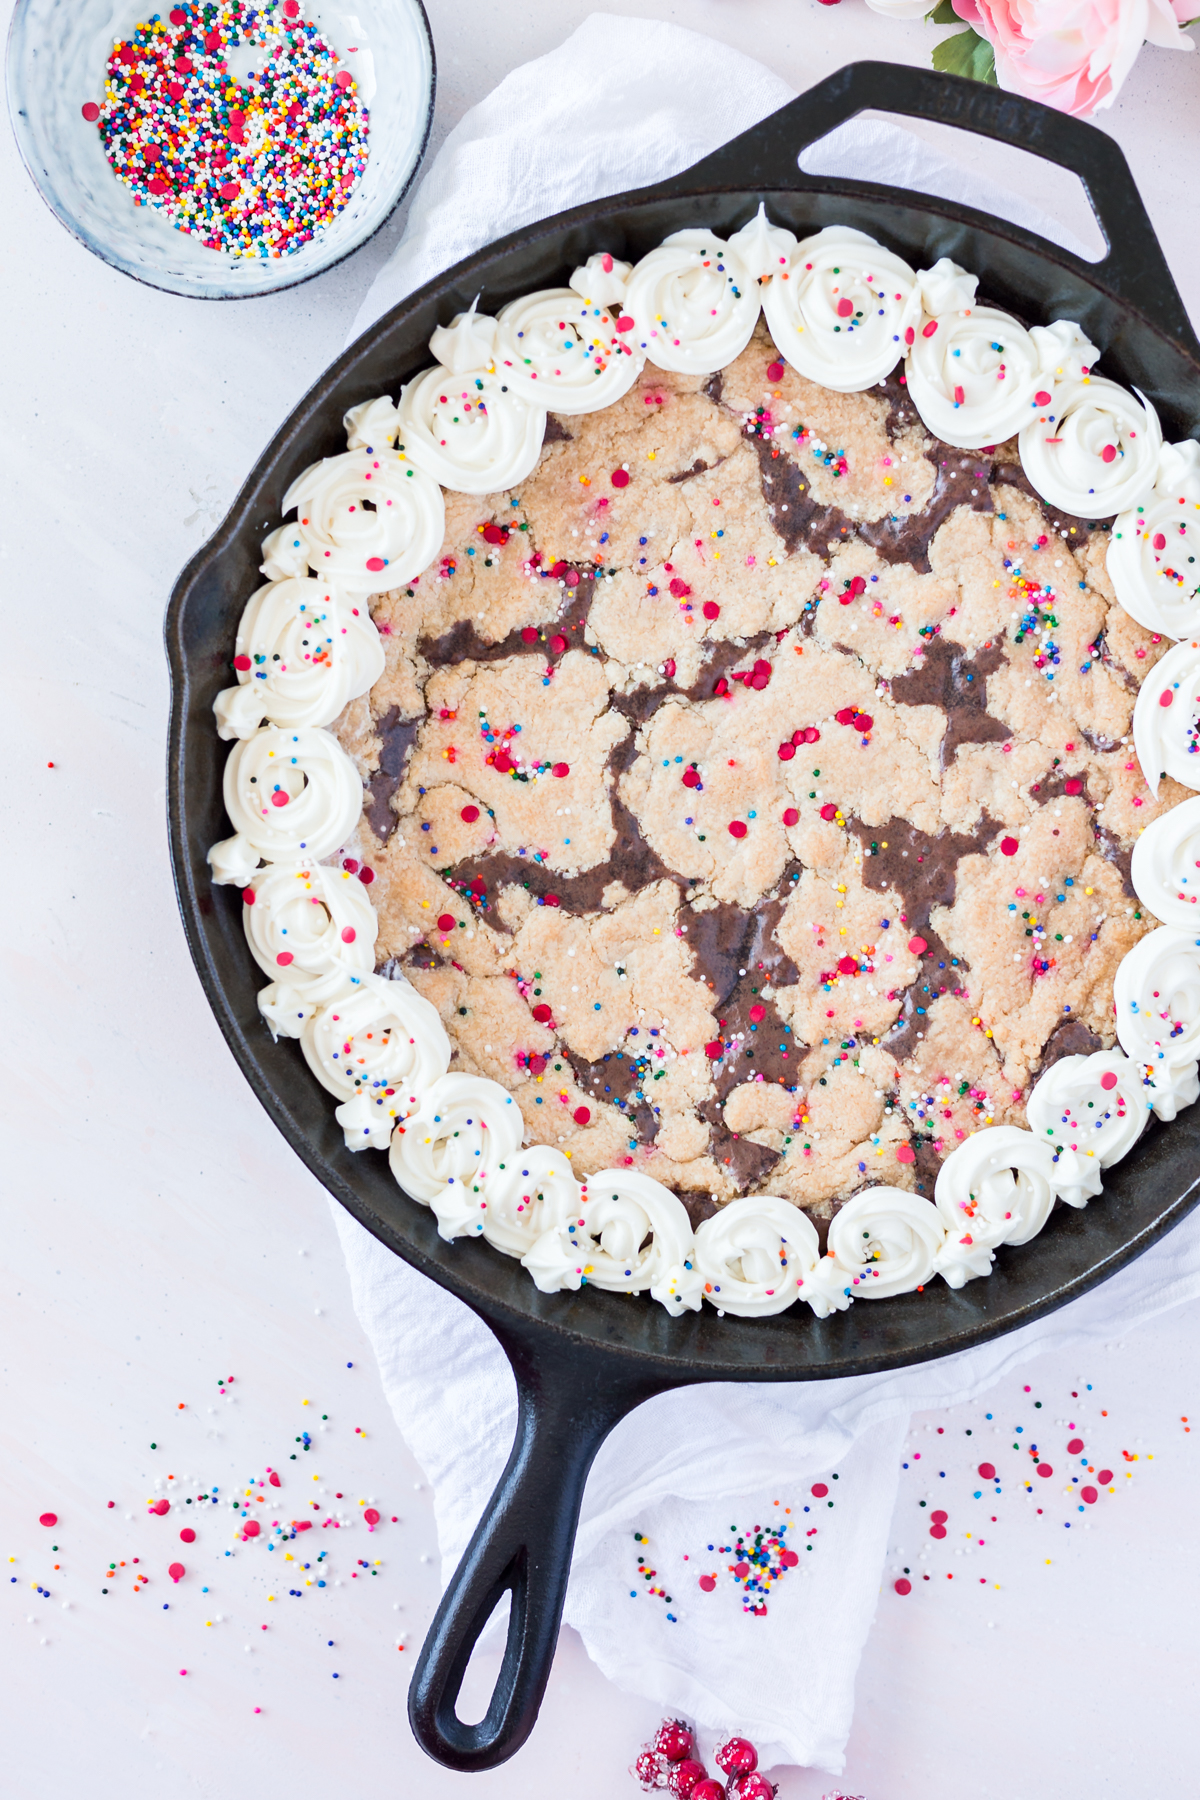 Cast iron skillet brookie with vanilla frosting and funfetti sprinkles.